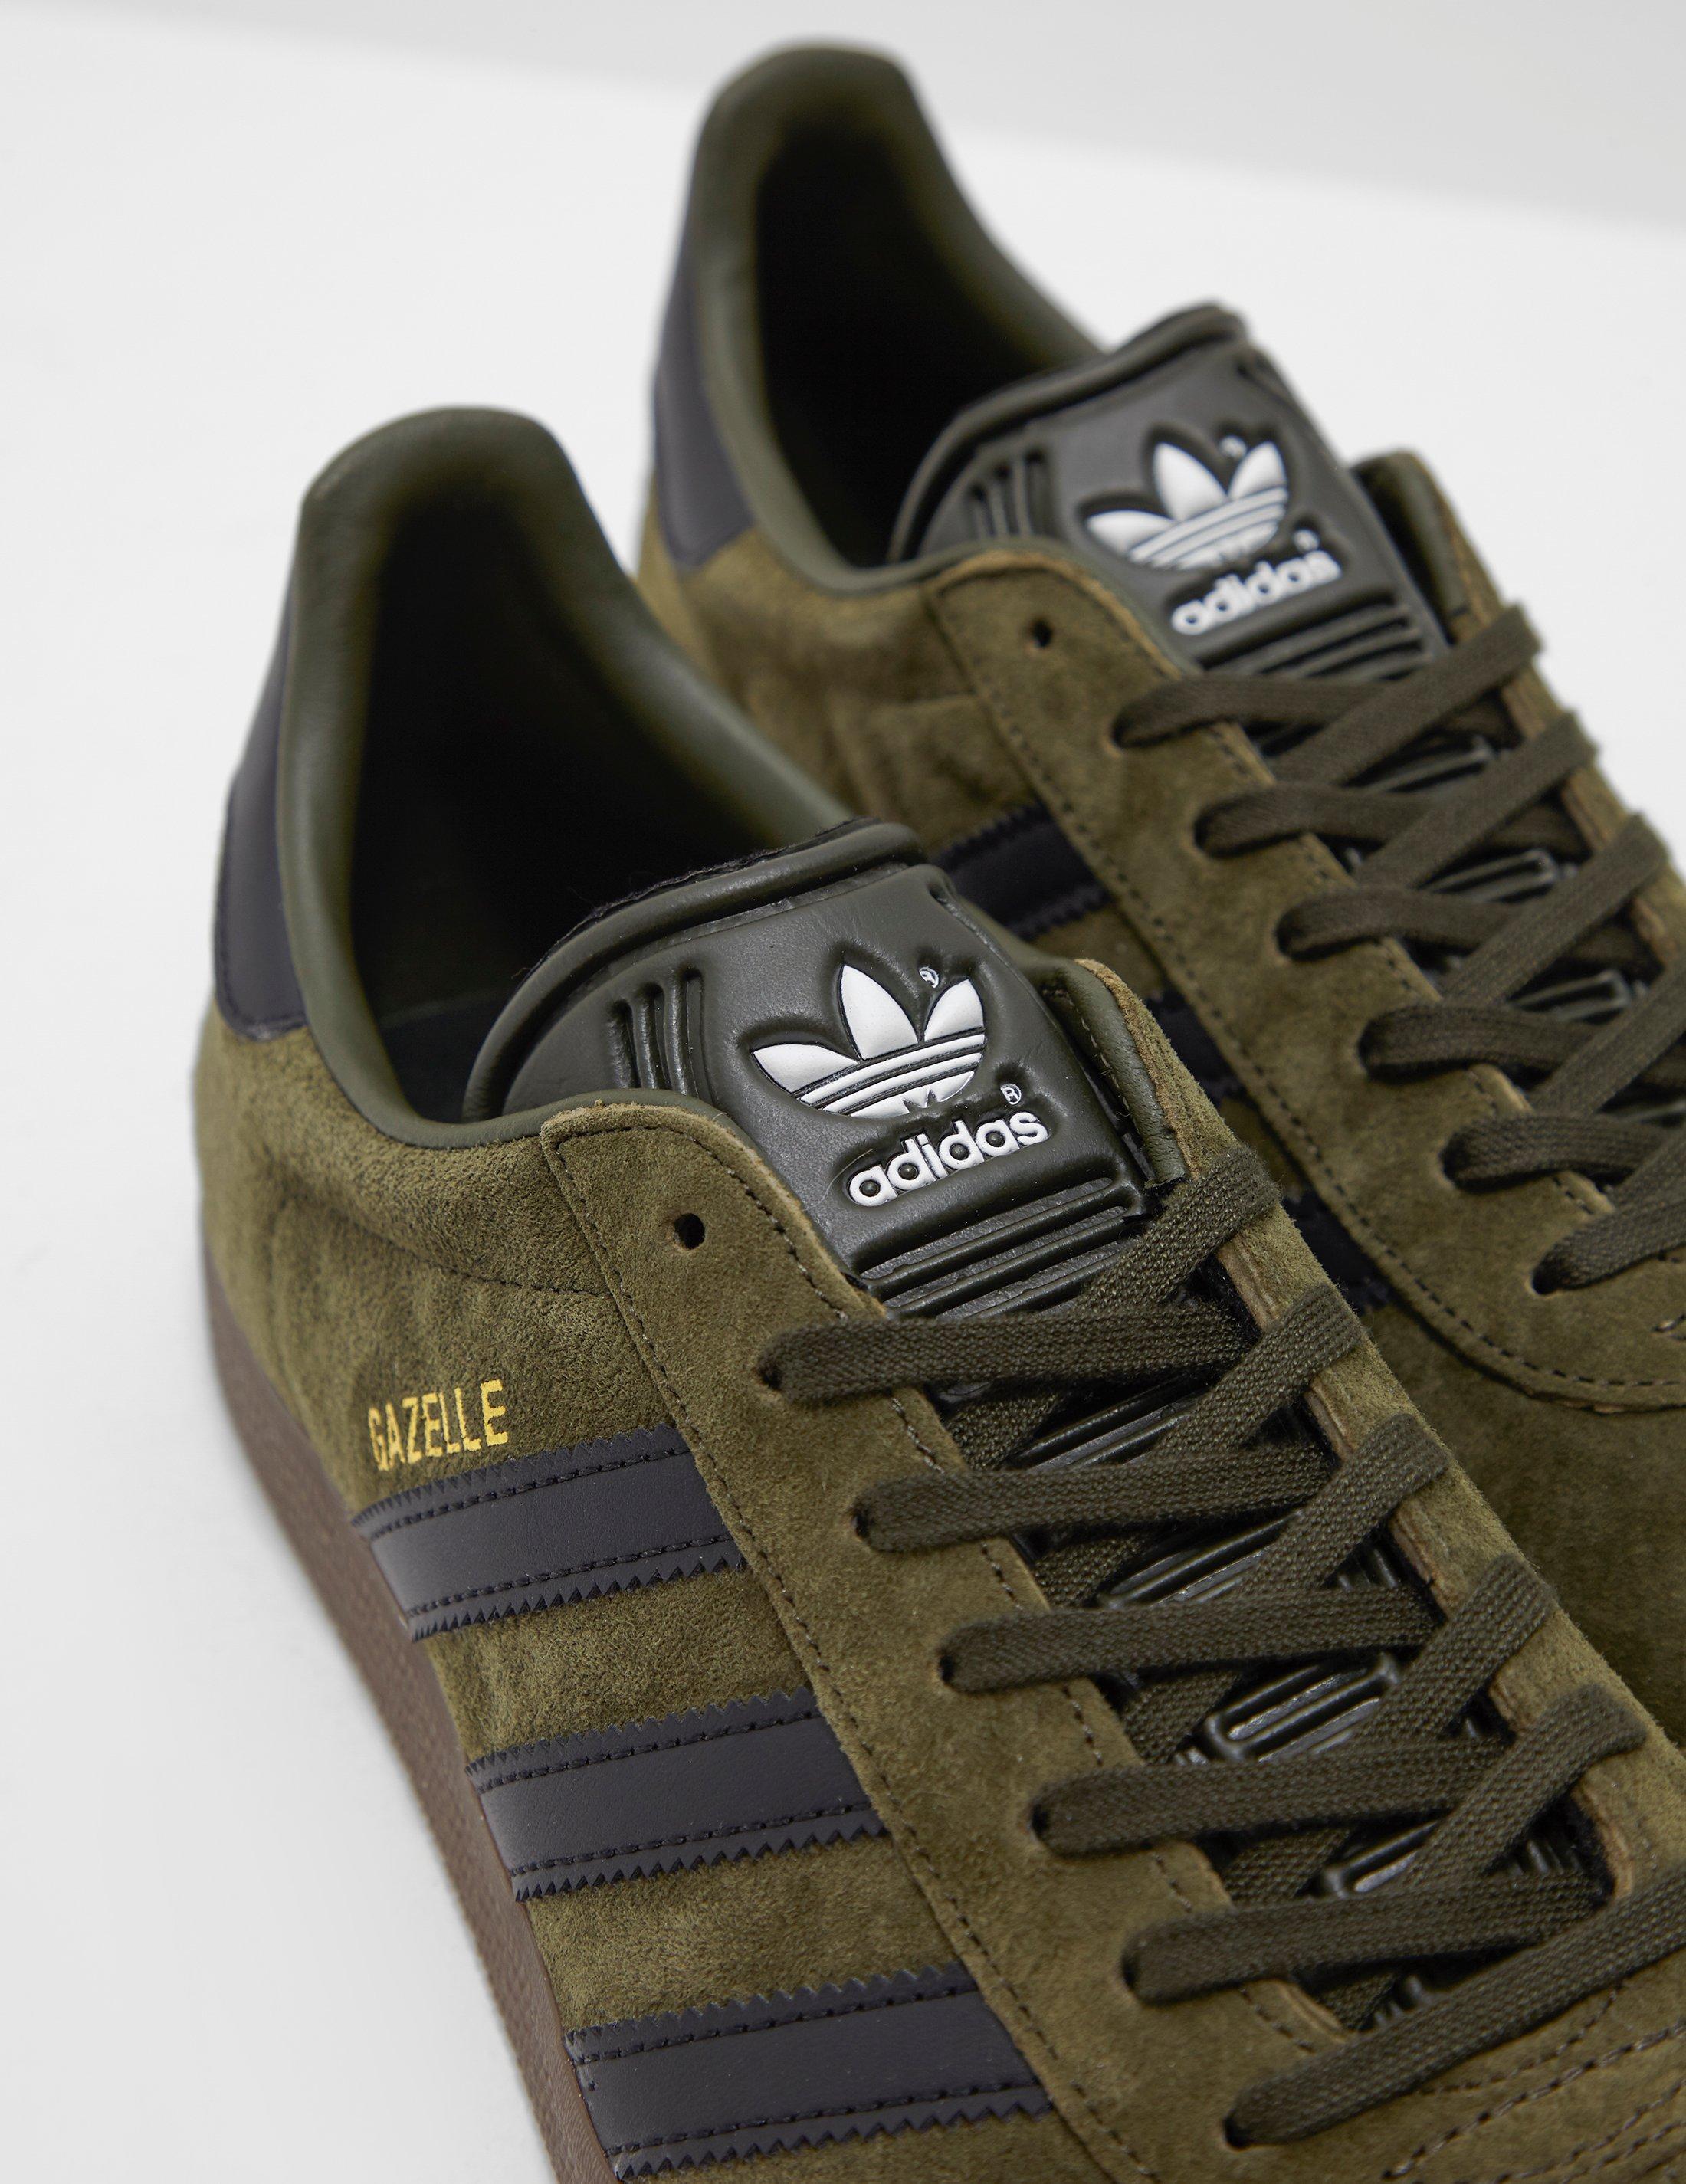 80s Casual Classics Stunners Fresh Adidas Gazelles In Night Olive With Black  Stripe Detail Are Now In At 80s Casual Available In Sizes Offering A Fresh,  Clean And | clinicadamama.com.br